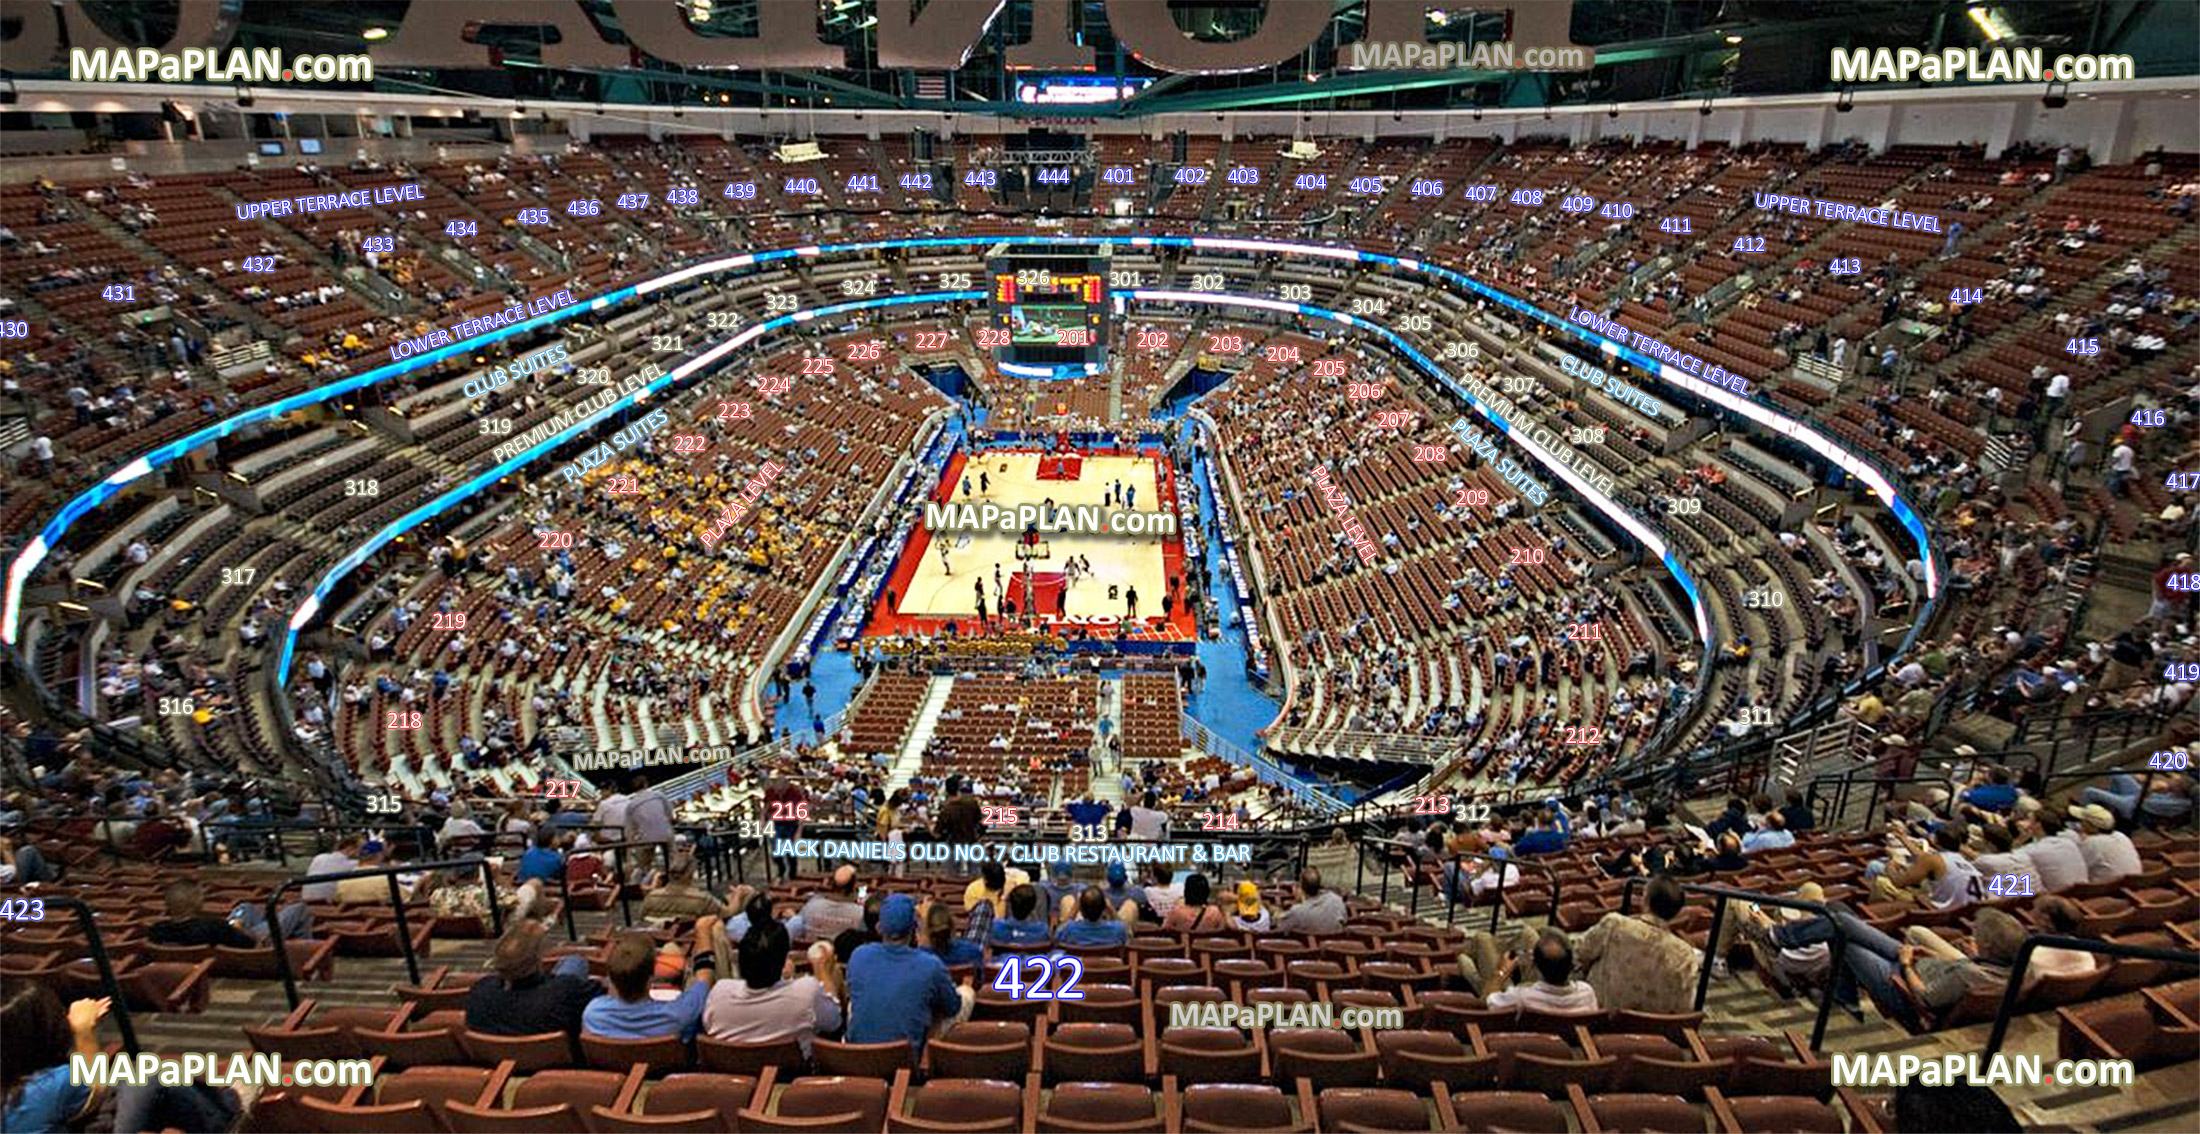 view section 422 row s seat 5 basketball seating college high school cif games jack daniels old club grand terrace sro standing room only rows luxury private boxes suites Anaheim Honda Center seating chart